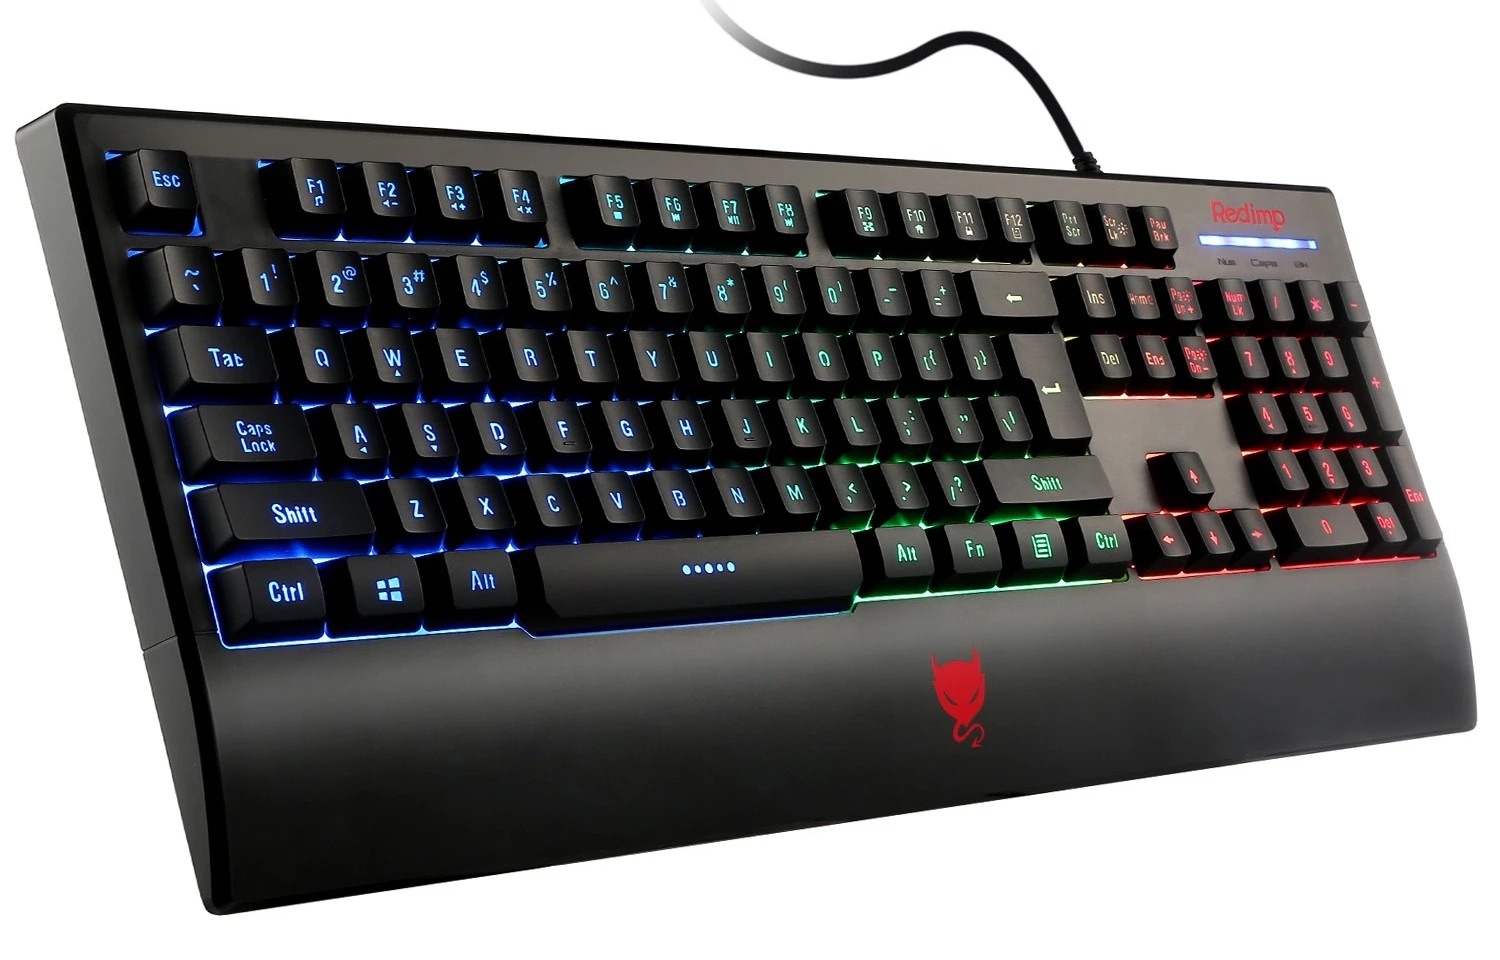 How To Change Modes In The Redimp RGB Gaming Keyboard